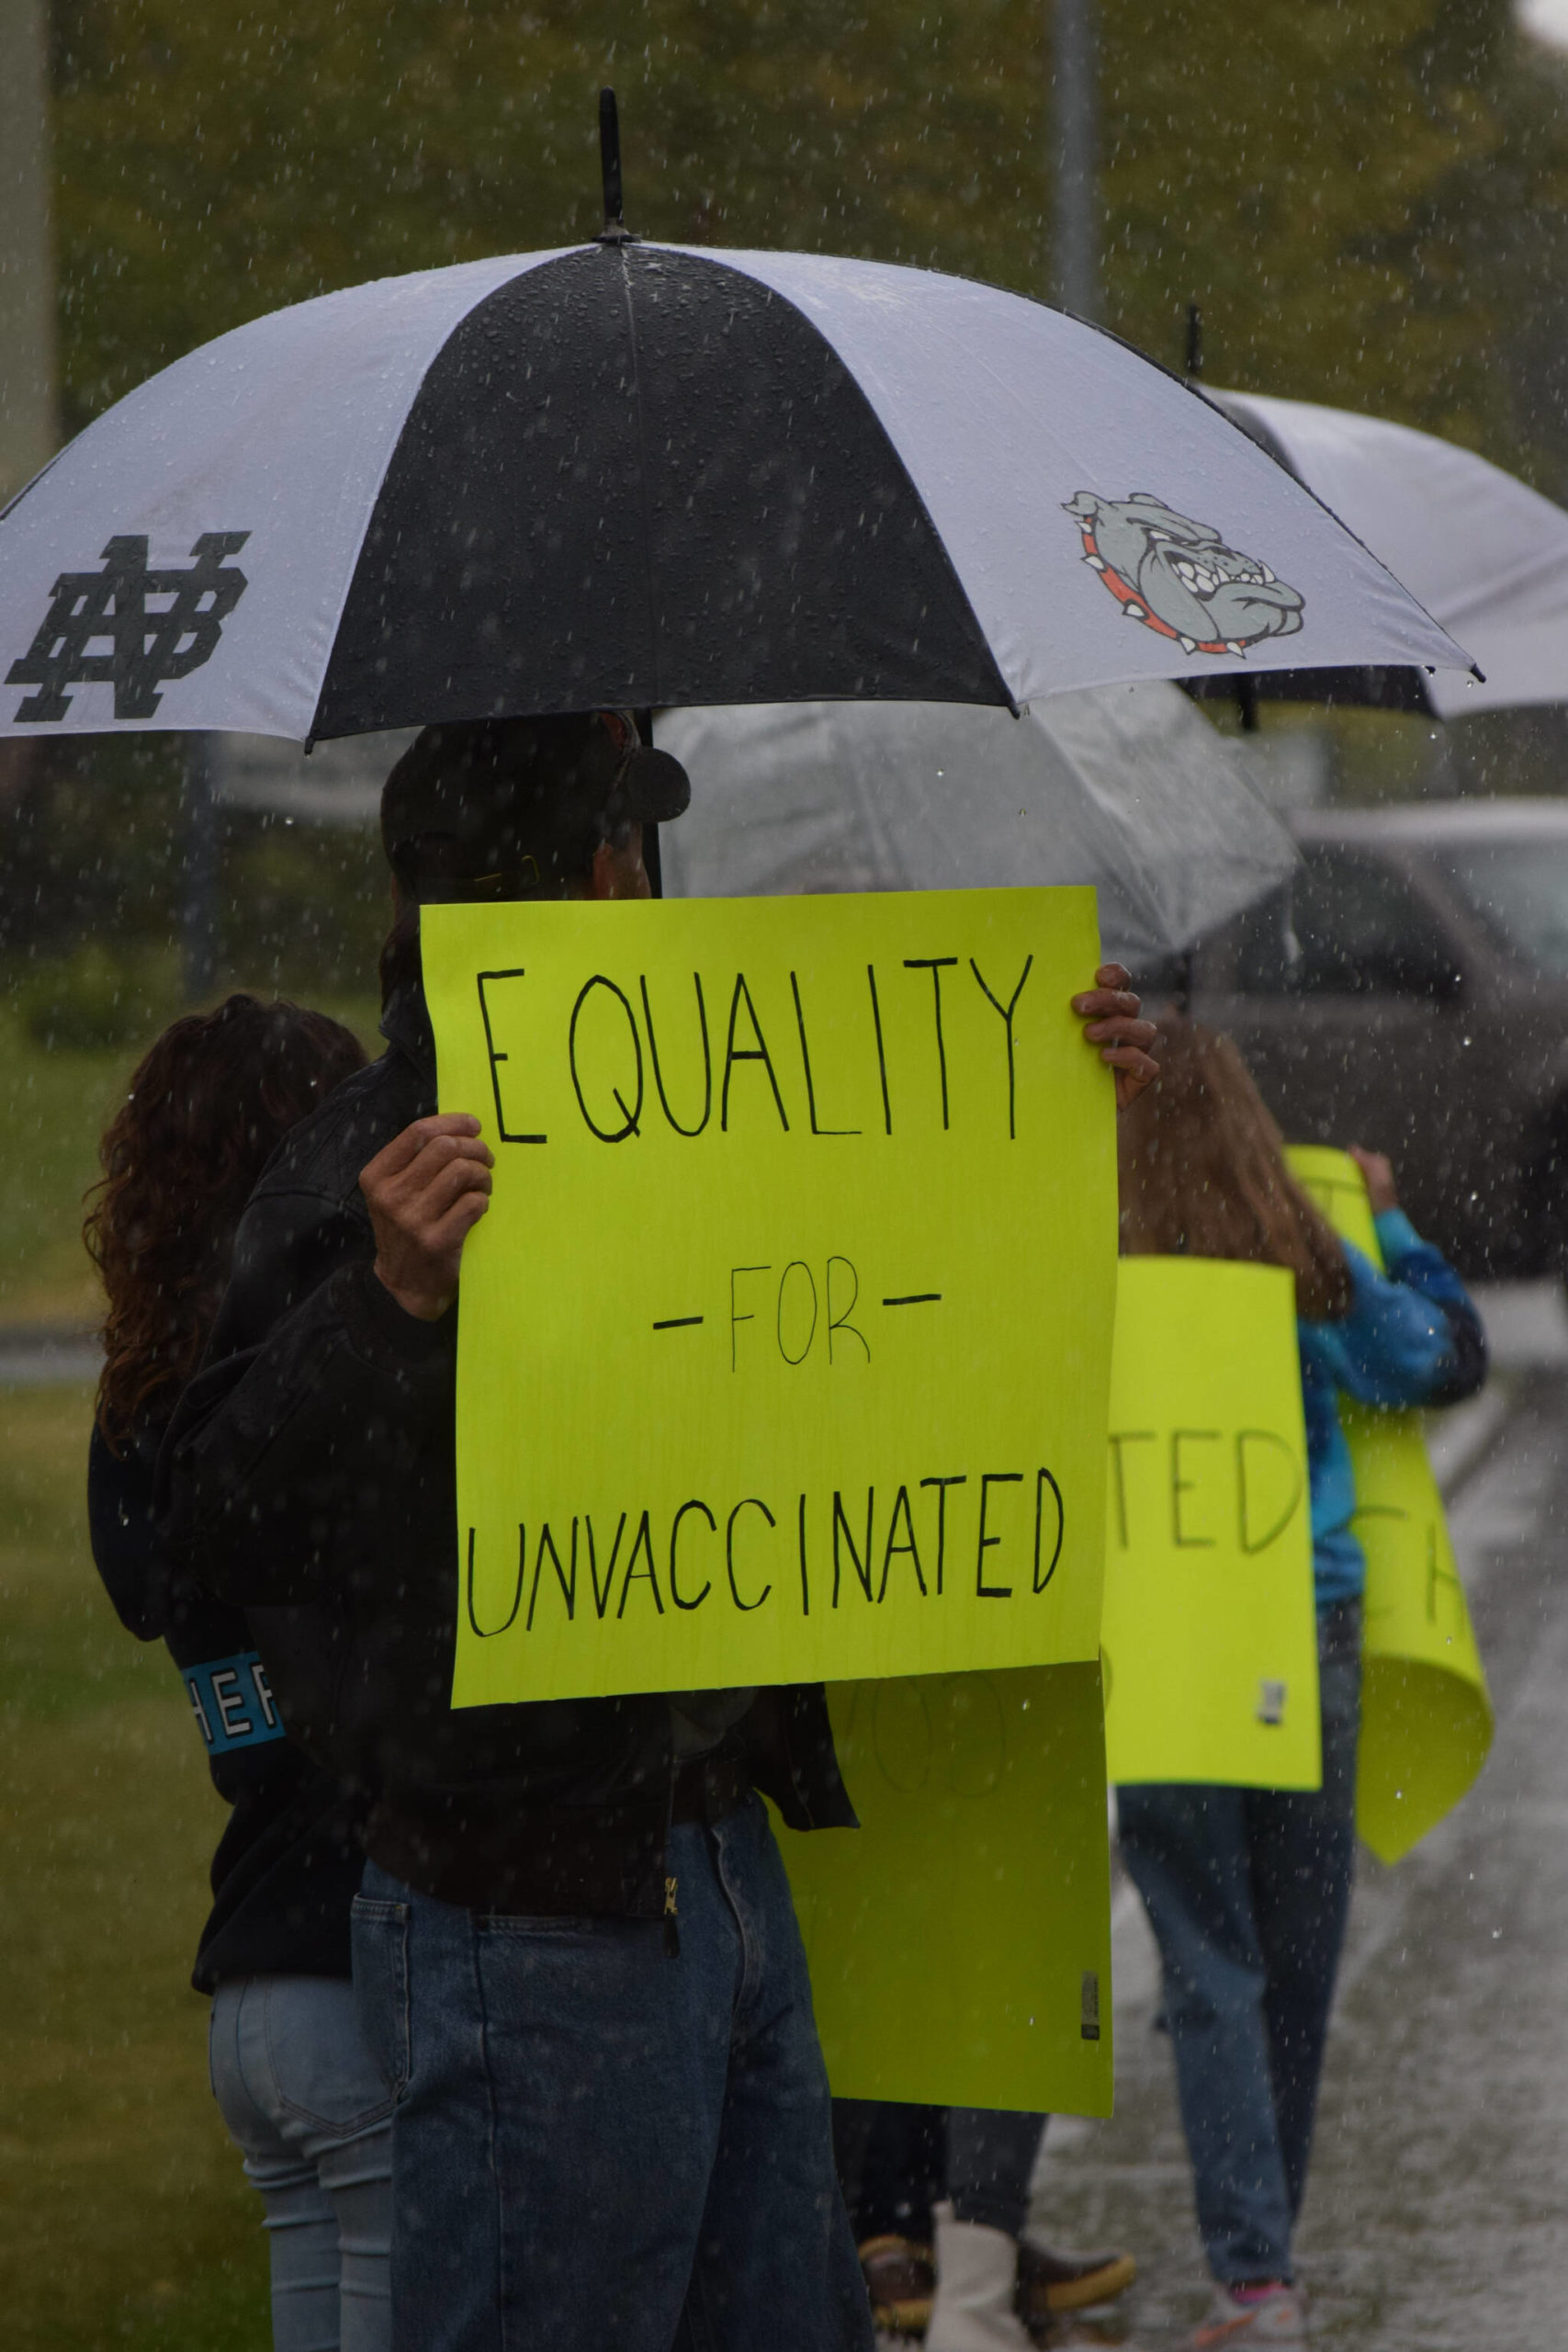 Protesters stand outside the George A. Navarre Borough Admin building in Soldotna on Tuesday, Sept. 14, 2021. (Camille Botello/Peninsula Clarion)